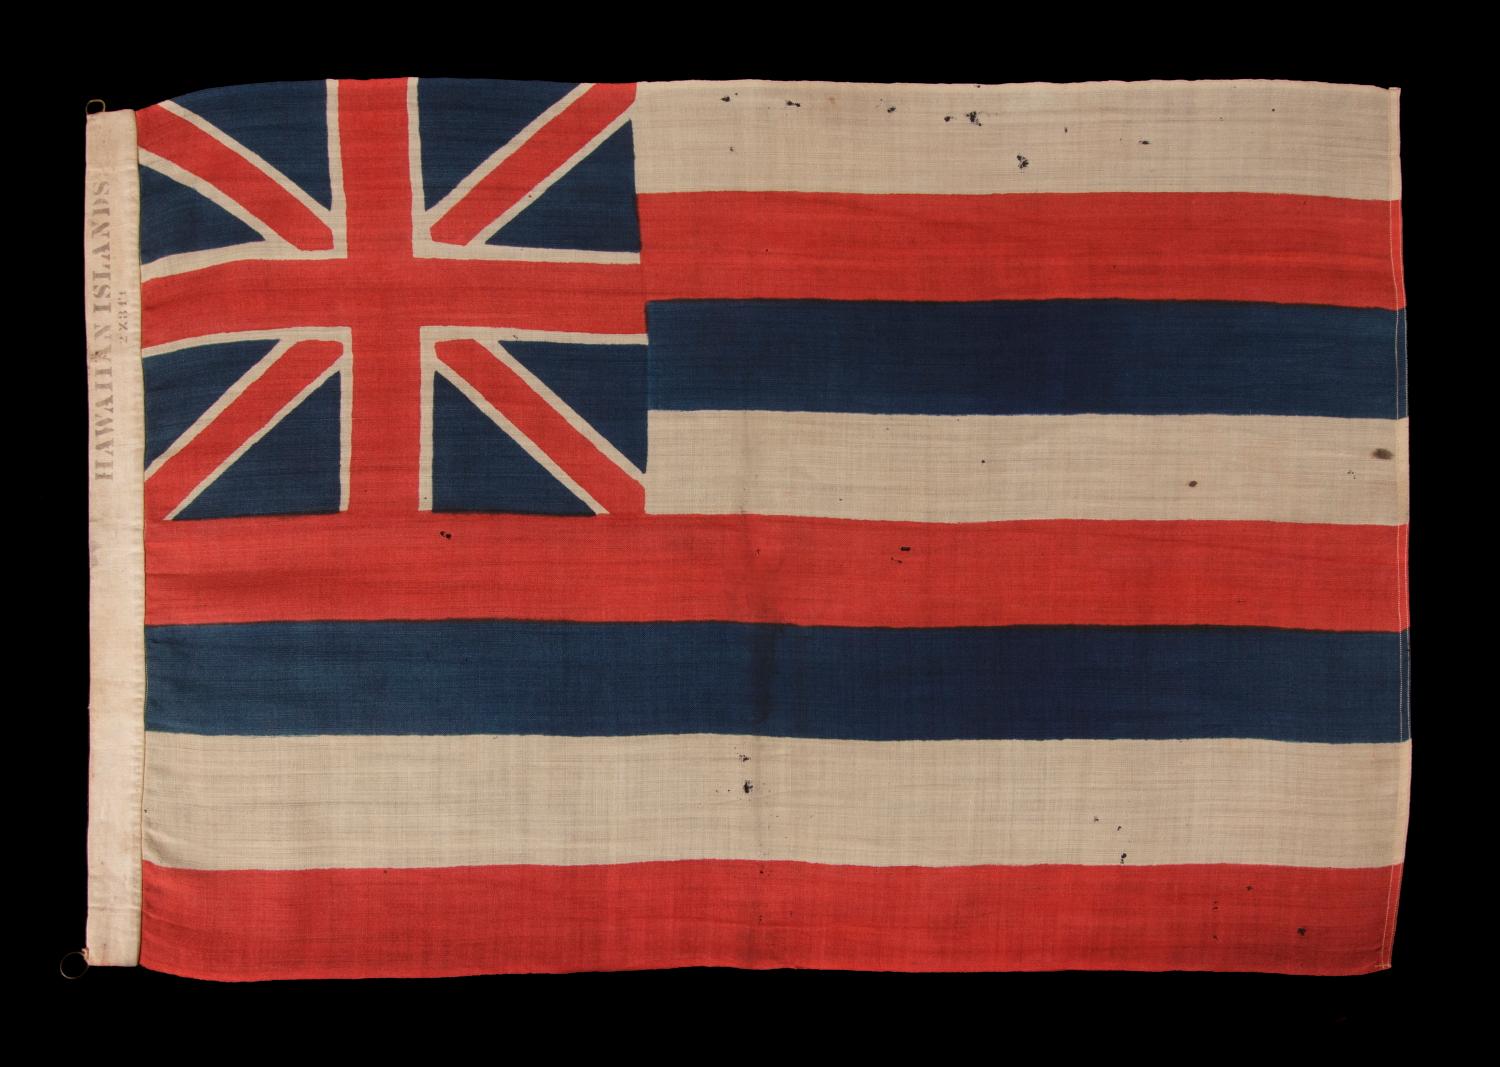 THE EARLIEST FLAG OF THE HAWAIIAN ISLANDS THAT I HAVE EVER ENCOUNTERED, MADE DURING THE MONARCHY, WITHIN THE PERIOD OF BRITISH PROTECTORATE, PRODUCED BY HORSTMANN & BROTHERS COMPANY IN PHILADELPHIA FOR DISPLAY AT THE 1876 CENTENNIAL INTERNATIONAL